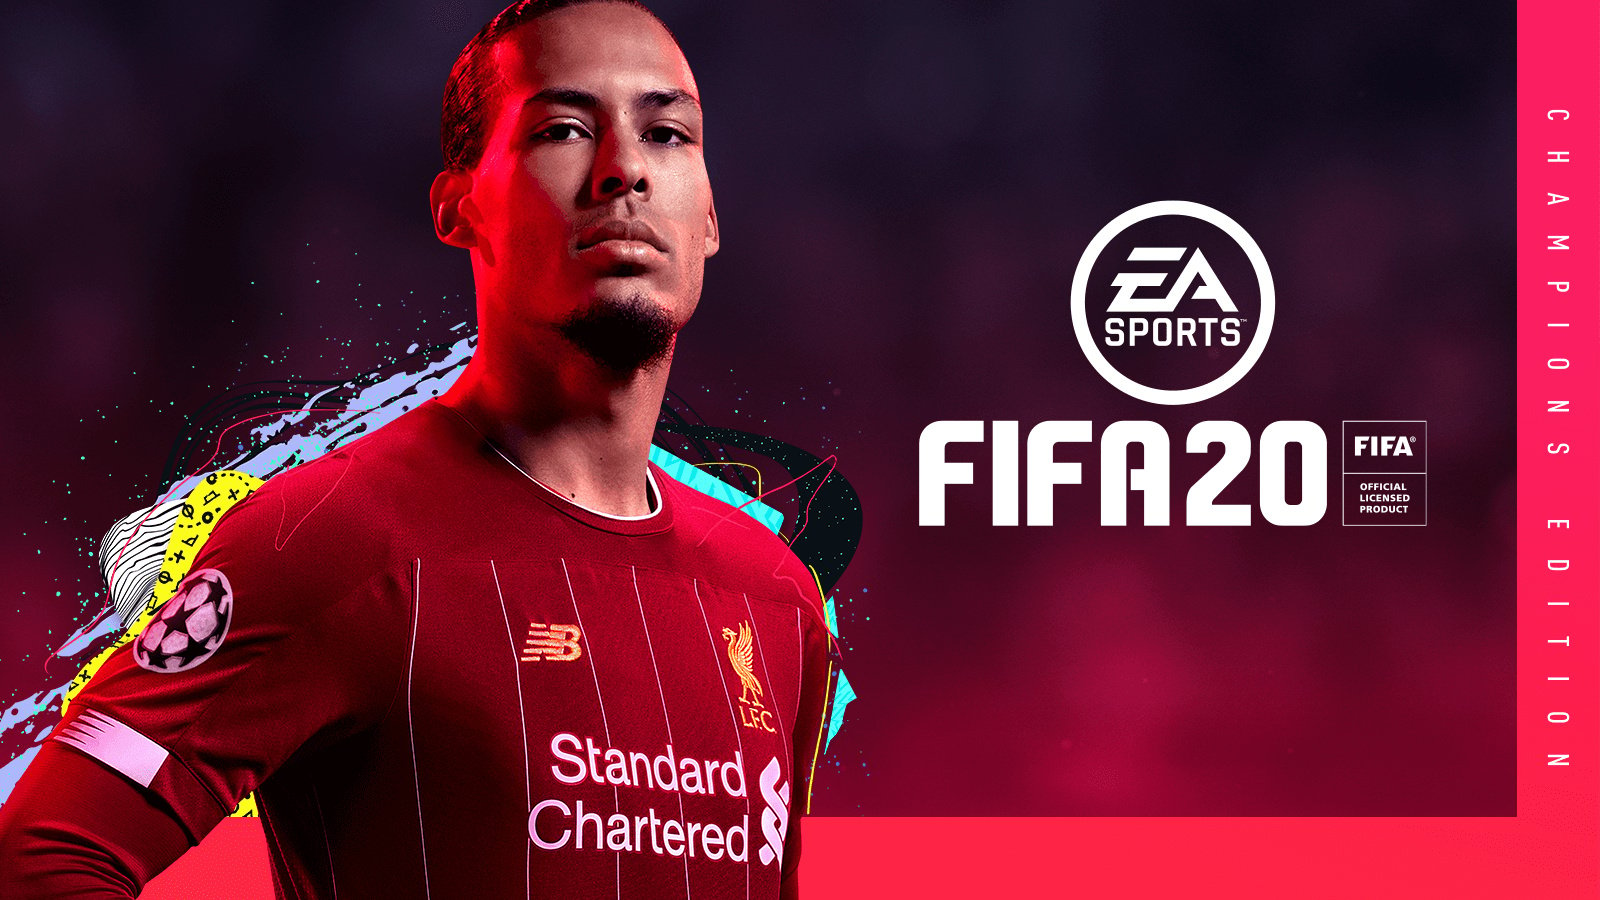 FIFA 20 Demo Is Ready for Kick Off on PS4 Push Square